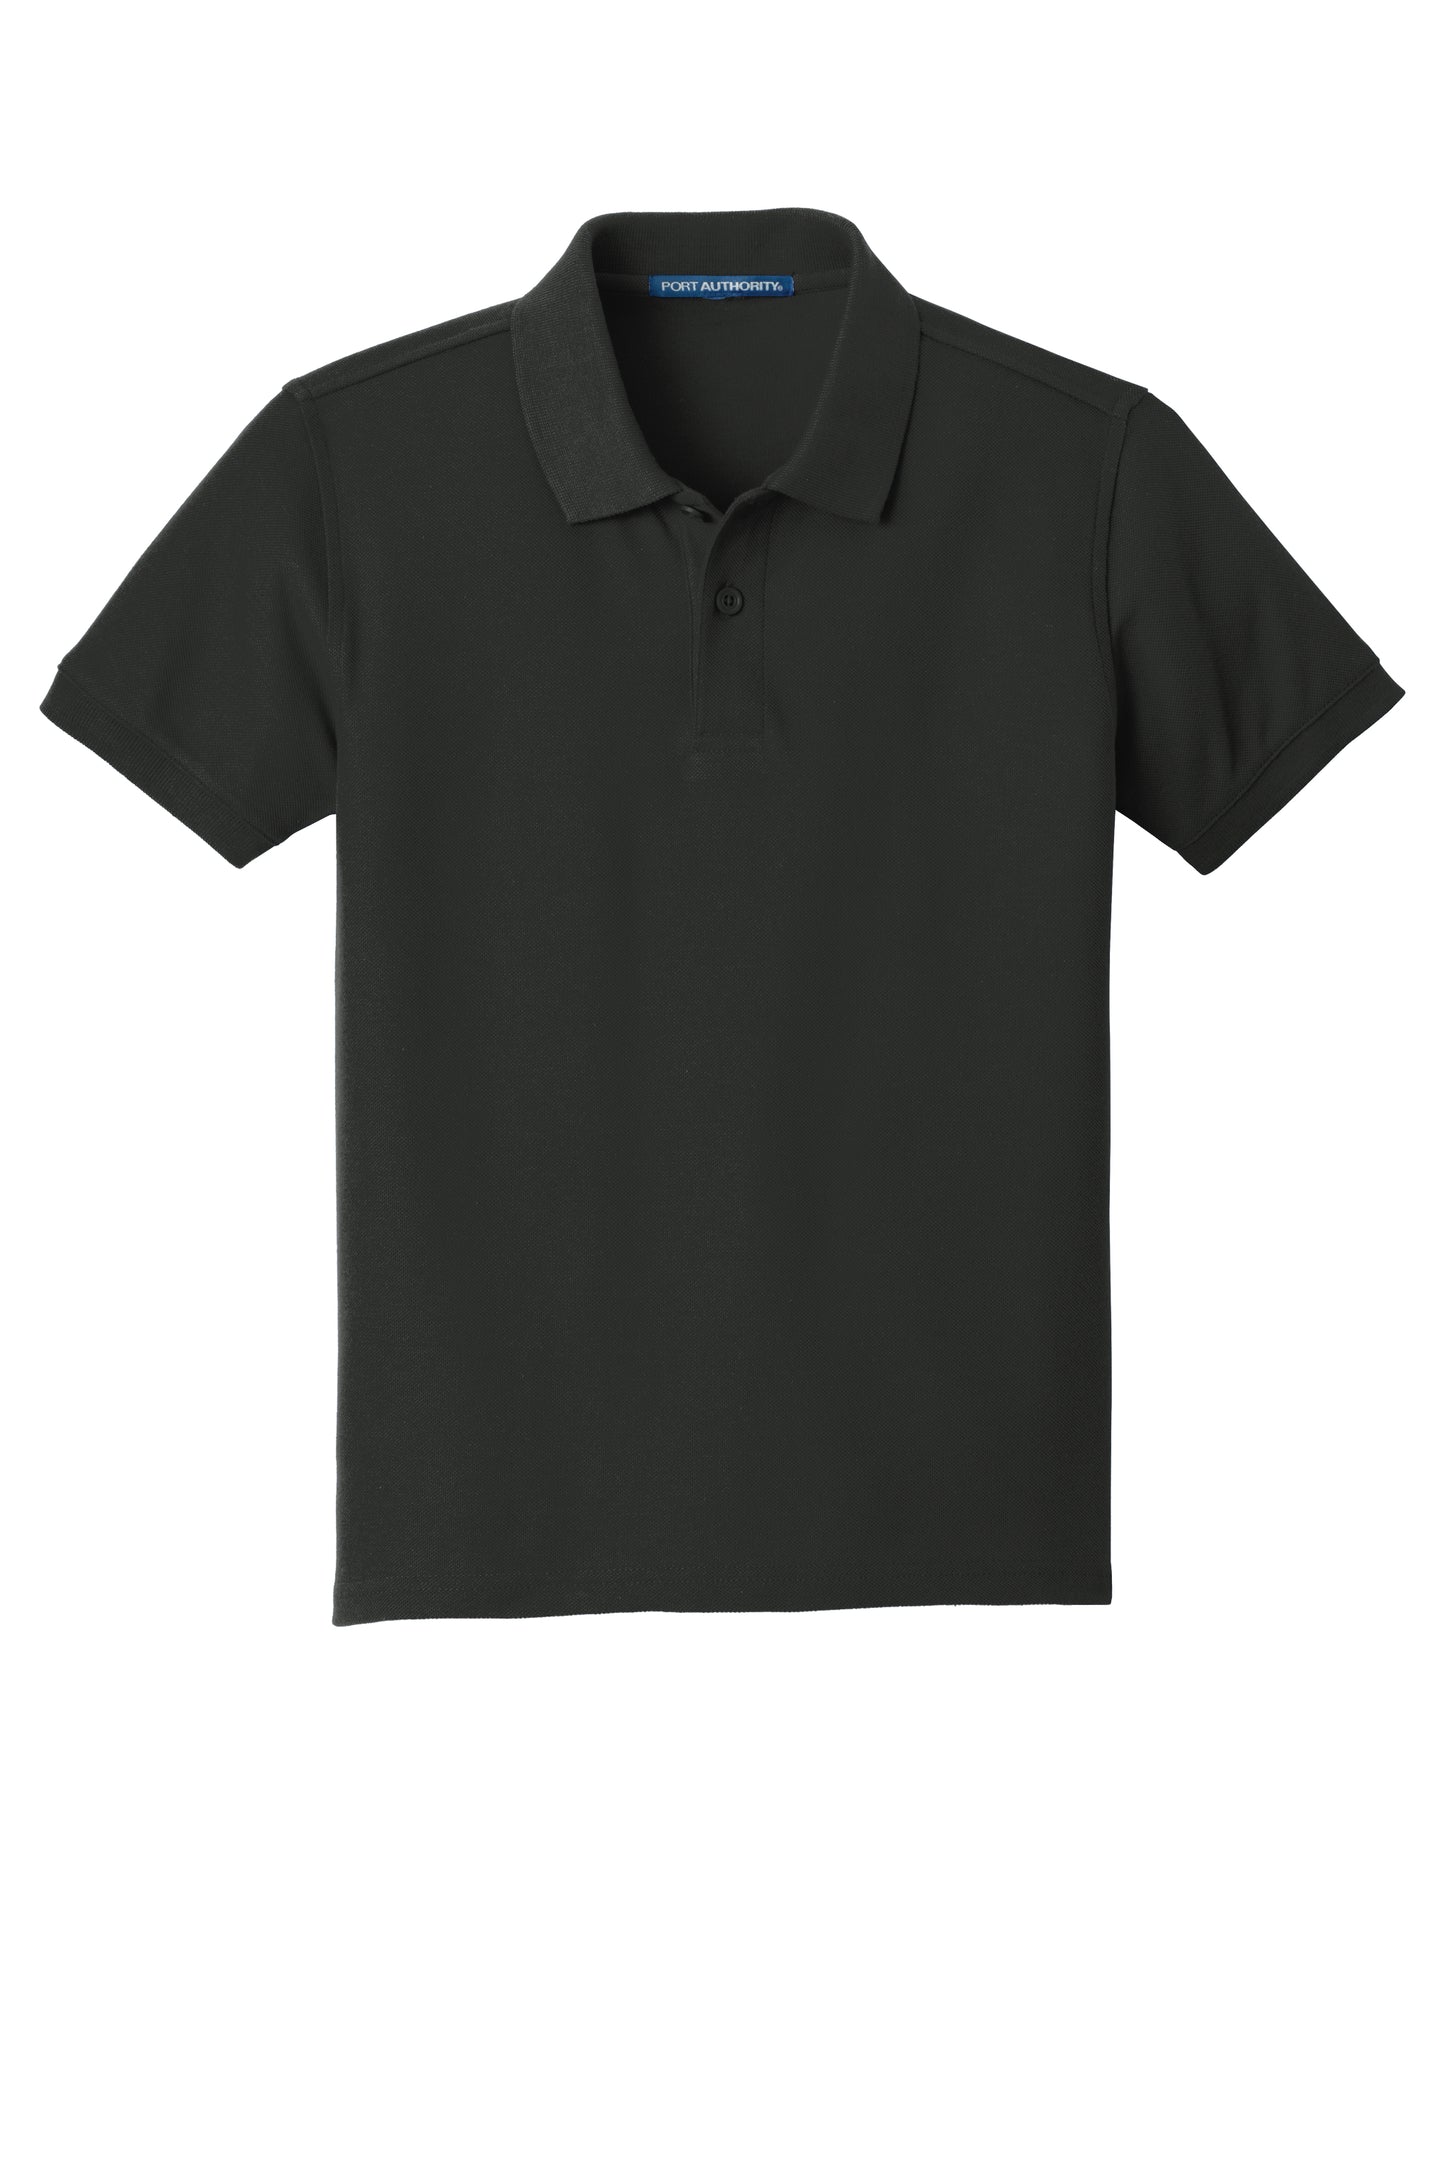 port authority youth core classic pique polo deep black